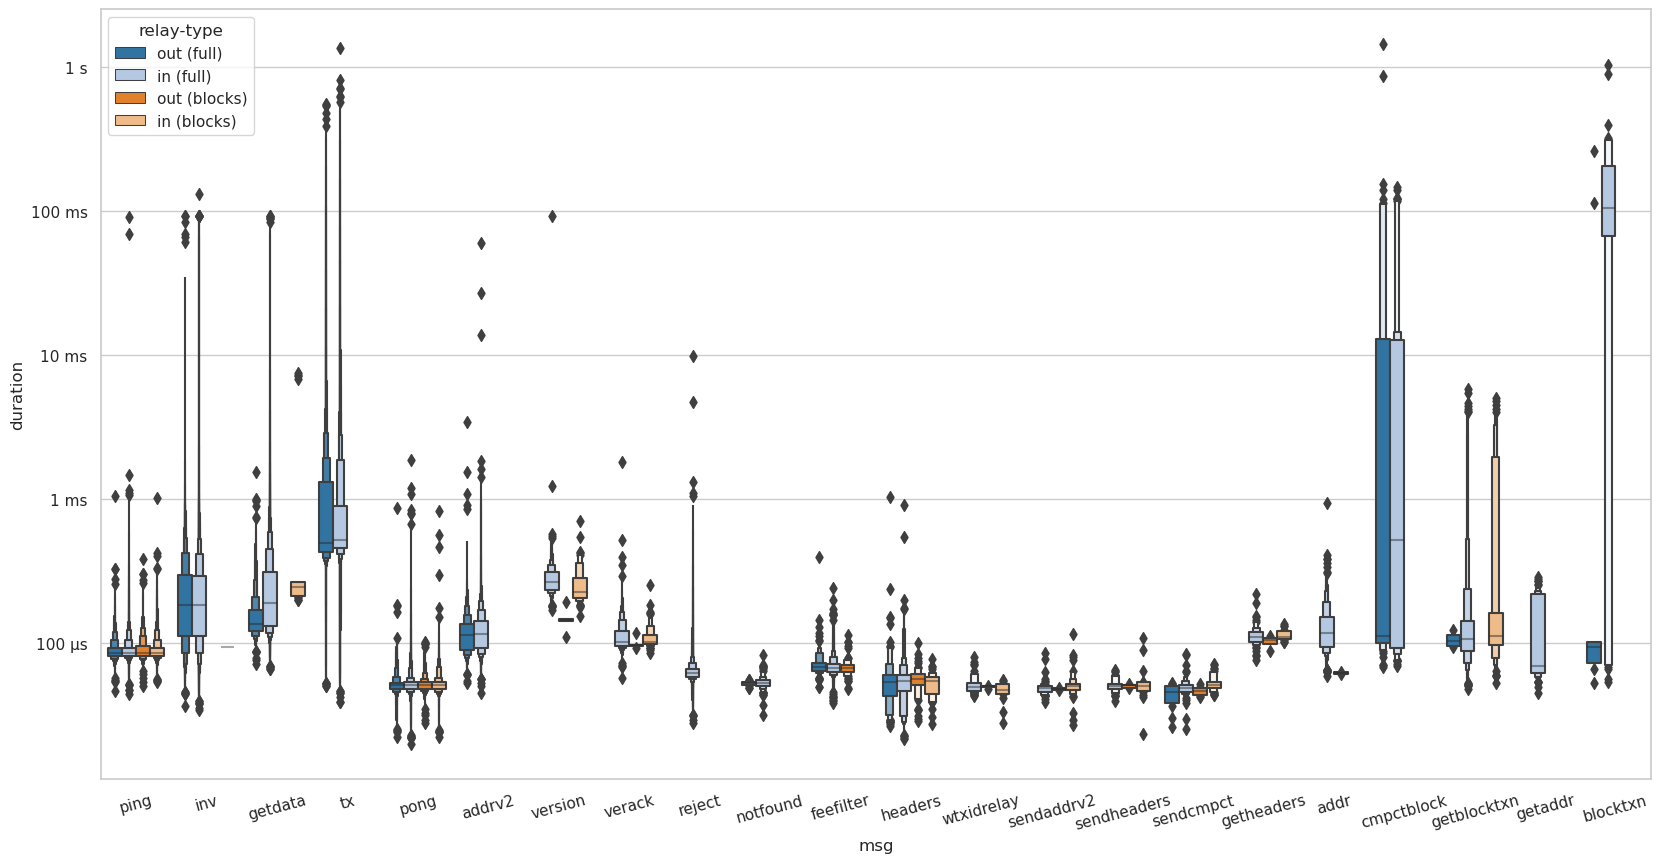 November 7th: Boxen plot of time taken to process a received message by relay-type.